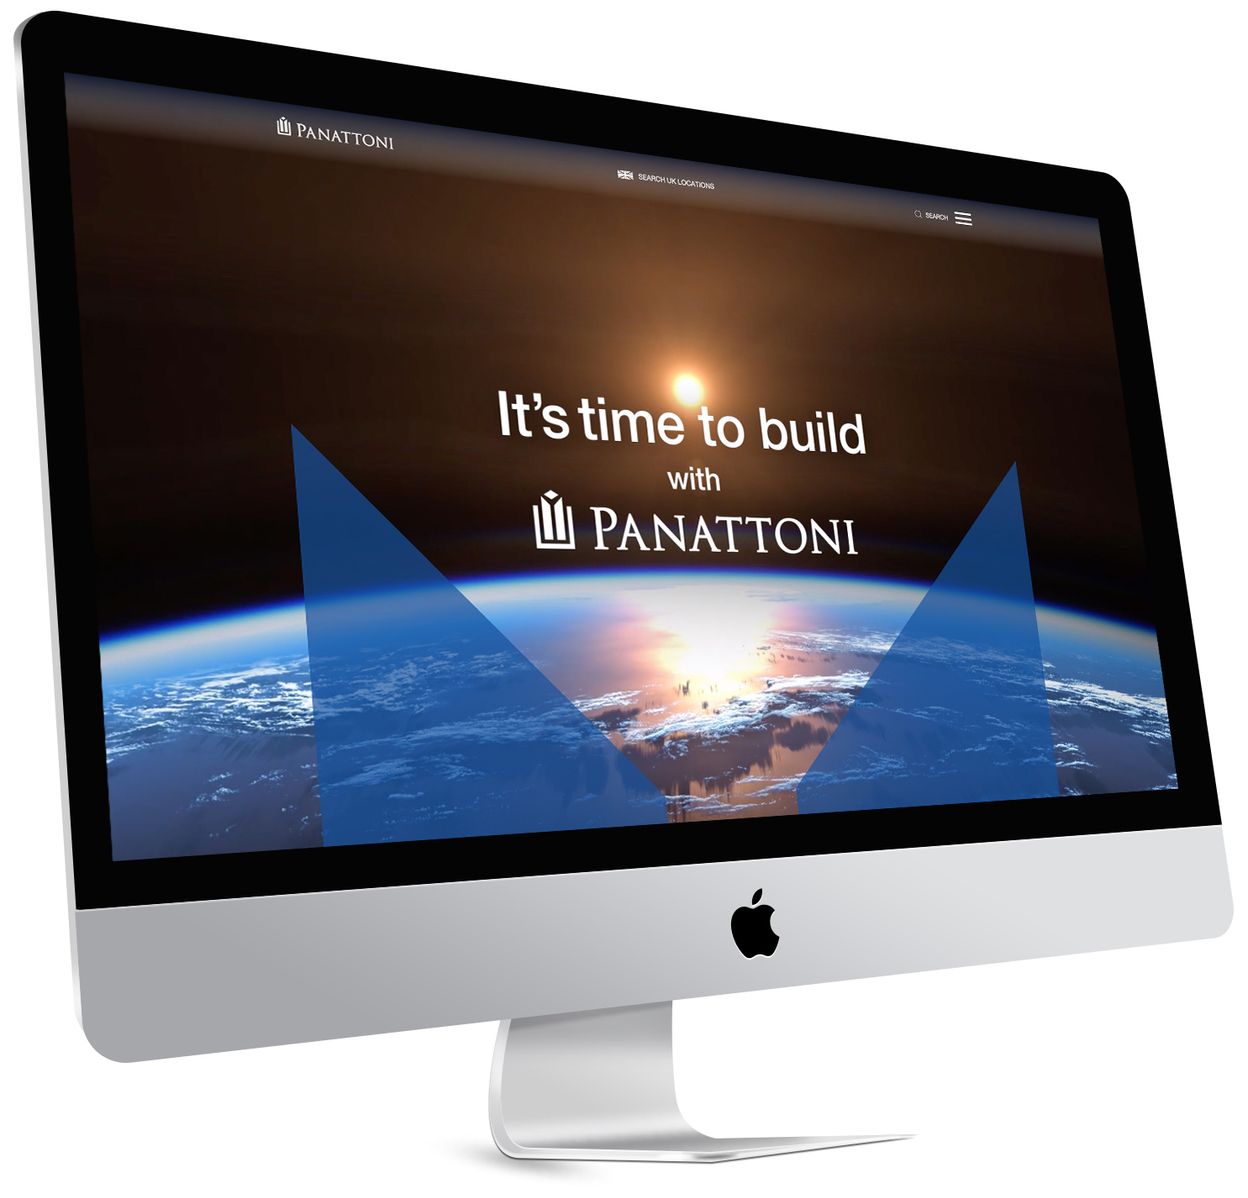 It's time to build with Panattoni